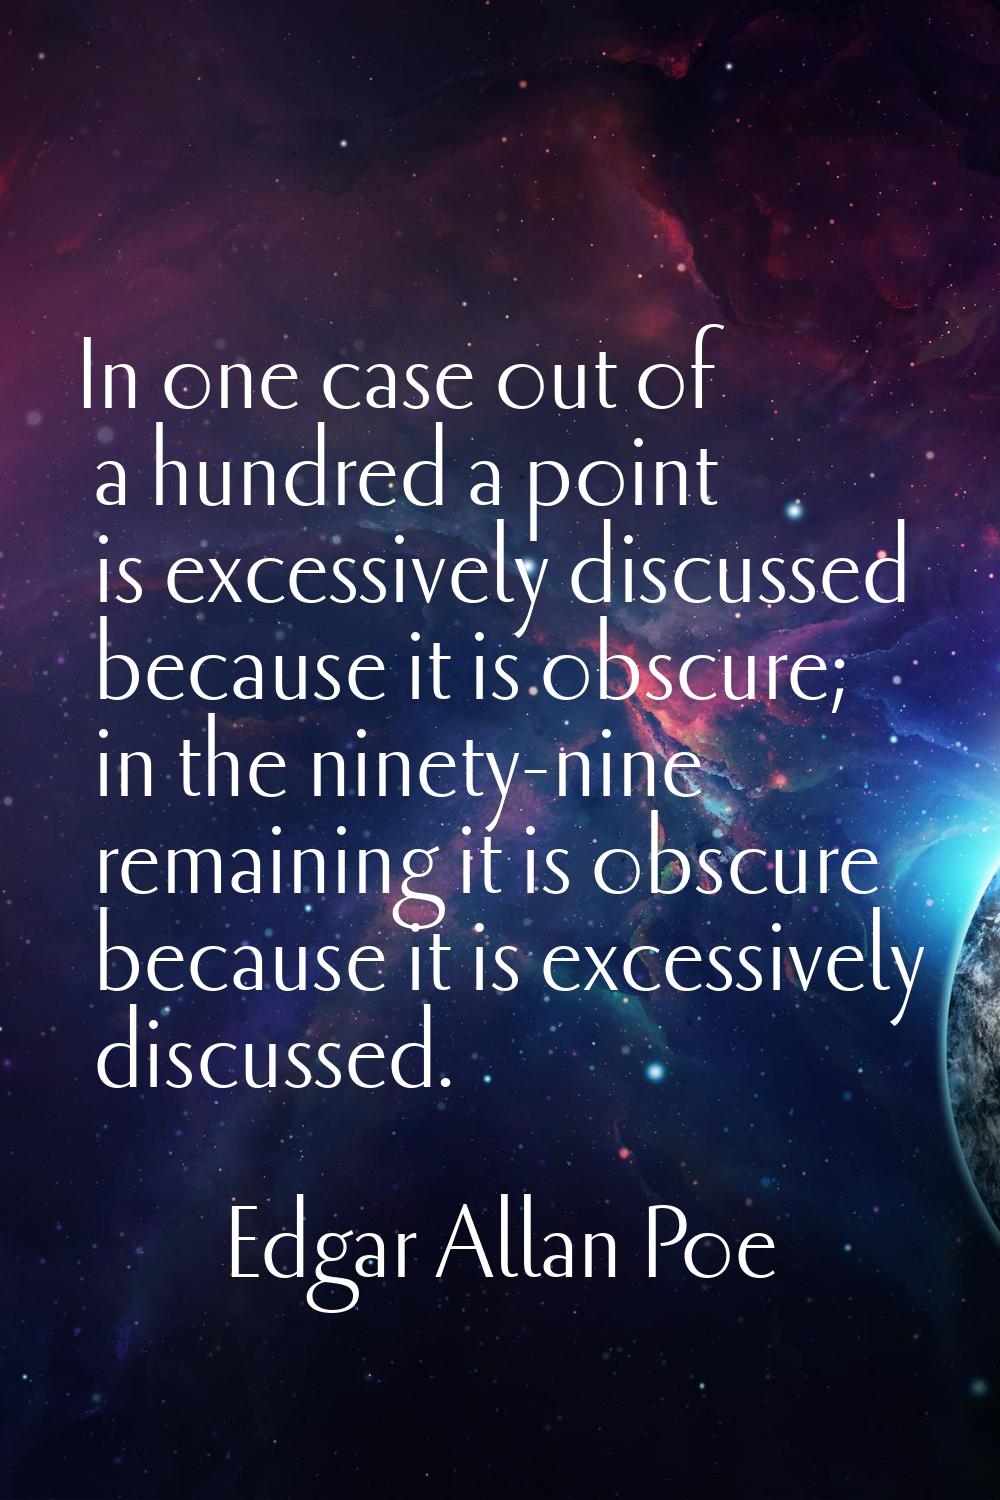 In one case out of a hundred a point is excessively discussed because it is obscure; in the ninety-